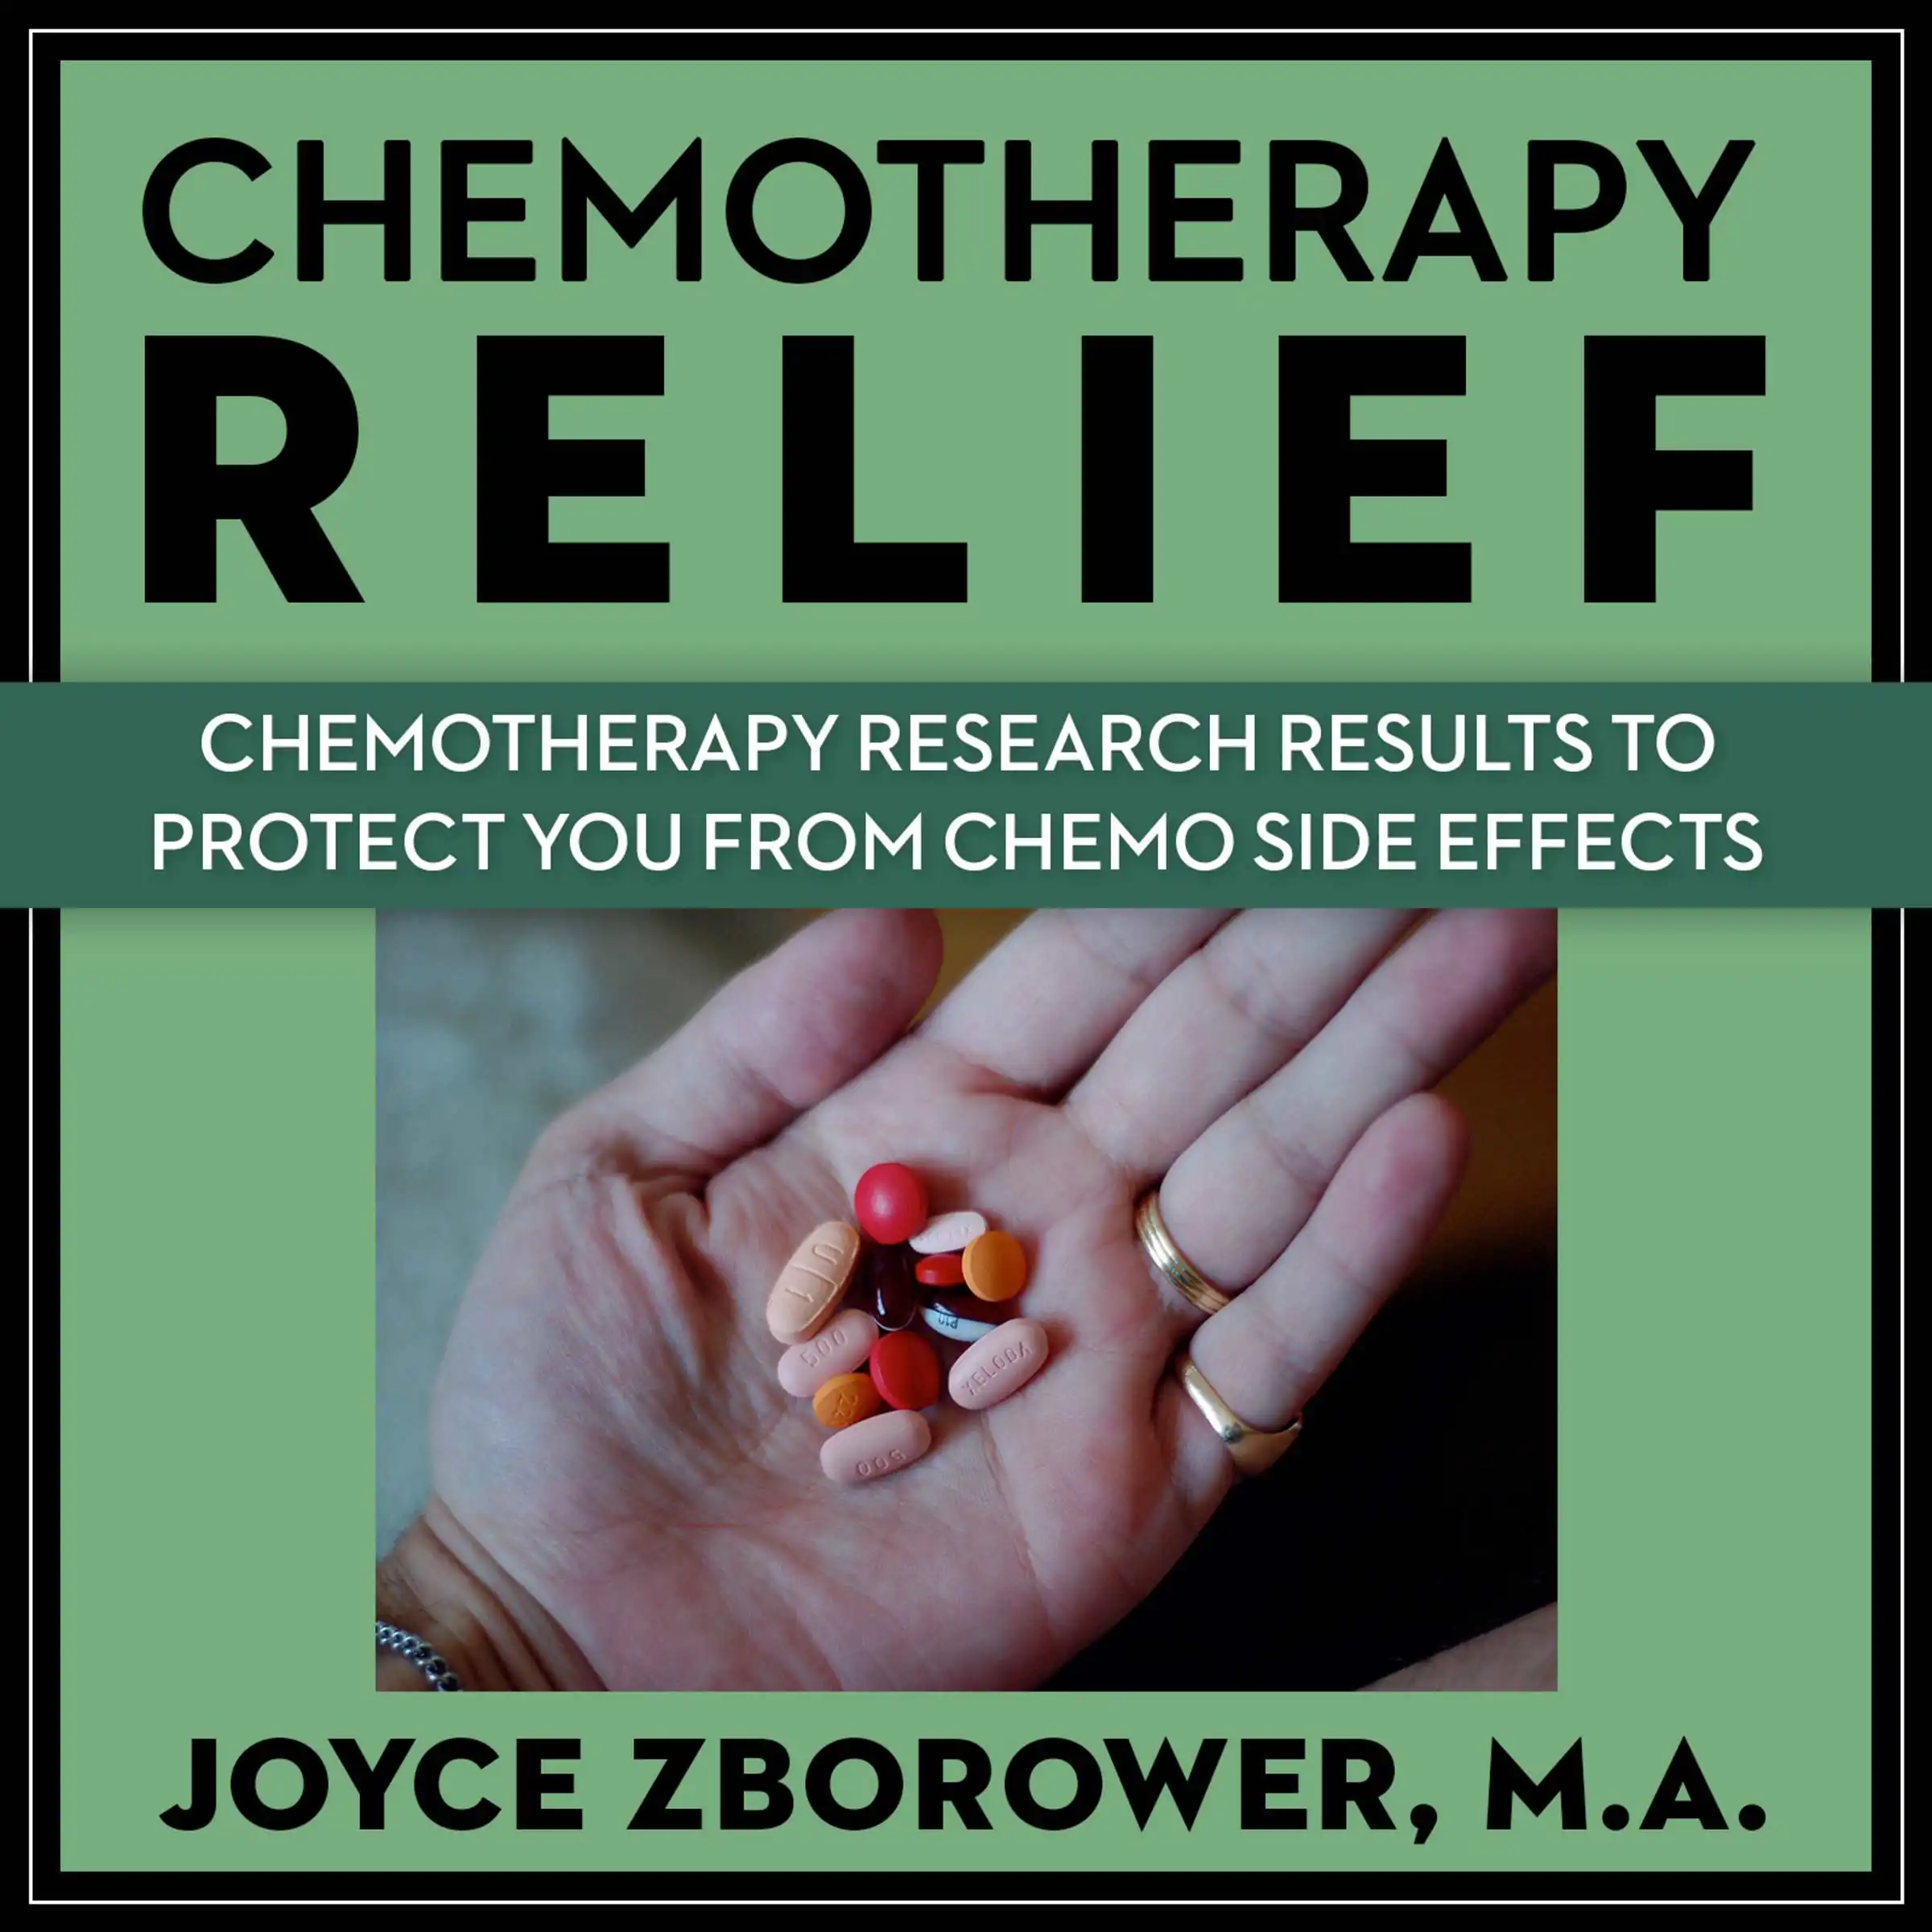 Chemotherapy Relief -- Chemotherapy Research Results to Protect You From Chemo Side Effects Audiobook by M.A.